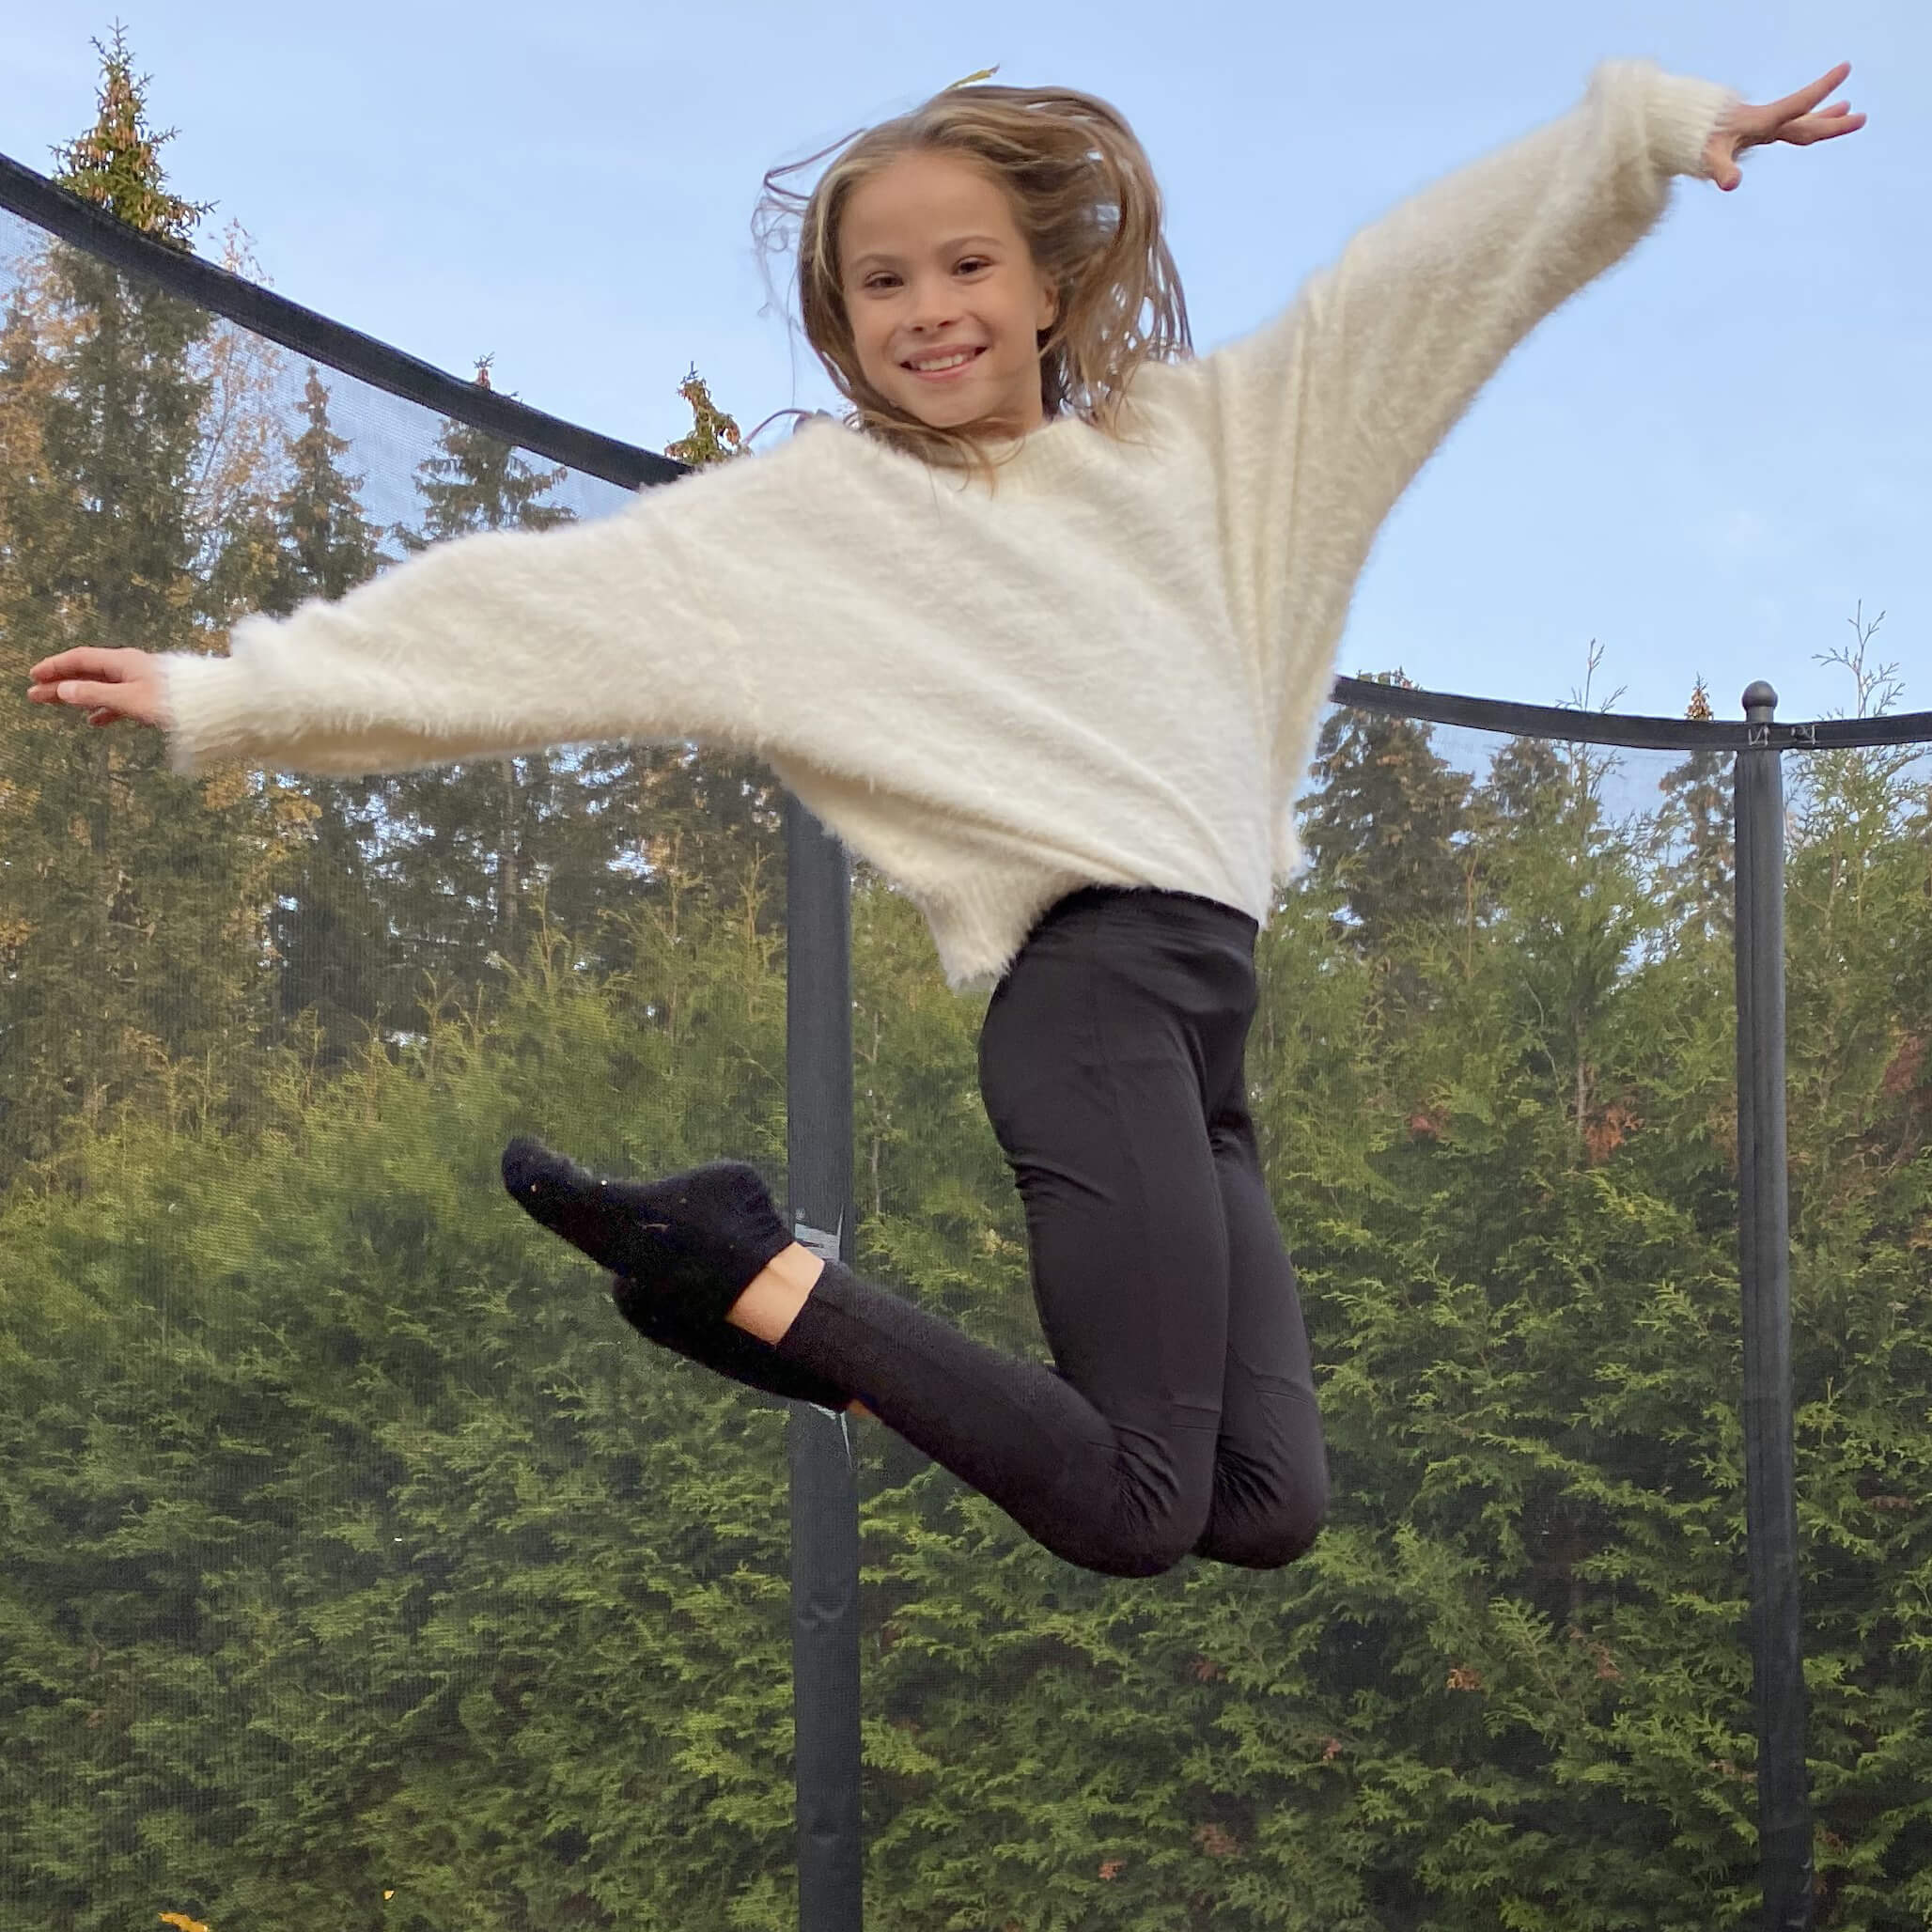 A smiling girl jumping on an Acon trampoline with safety net